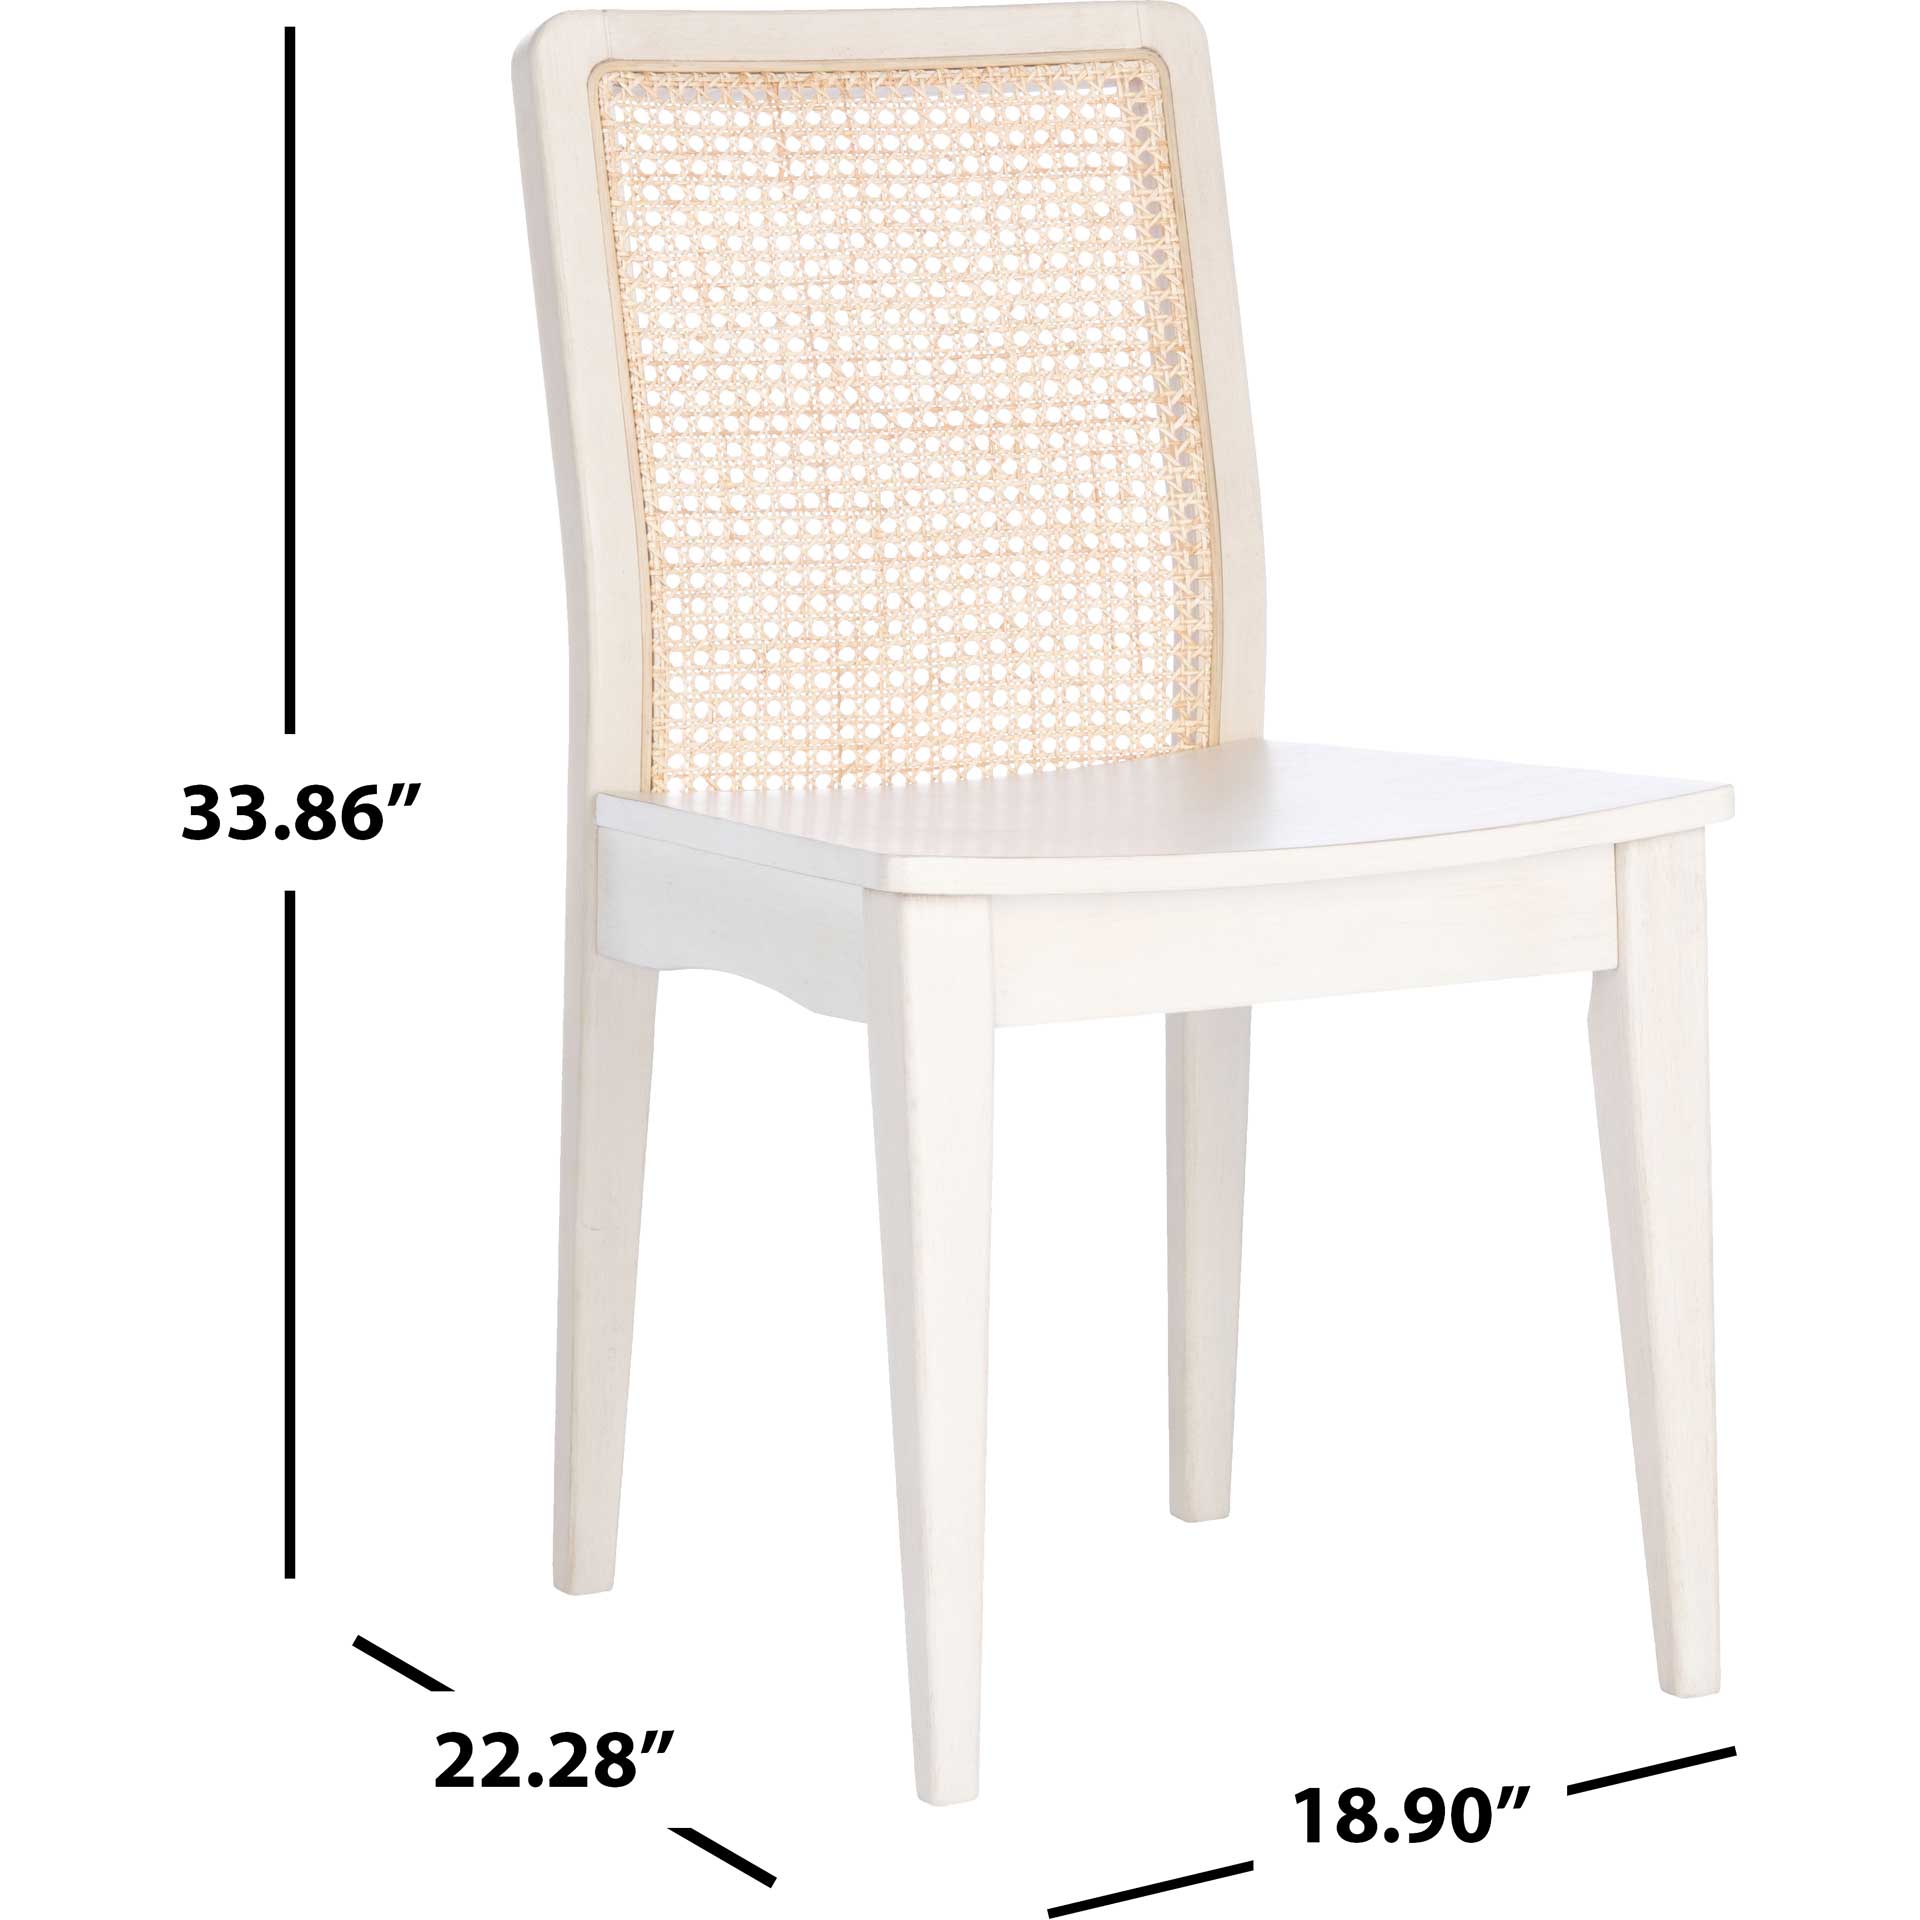 Belomy Rattan Dining Chair White/Natural (Set of 2)